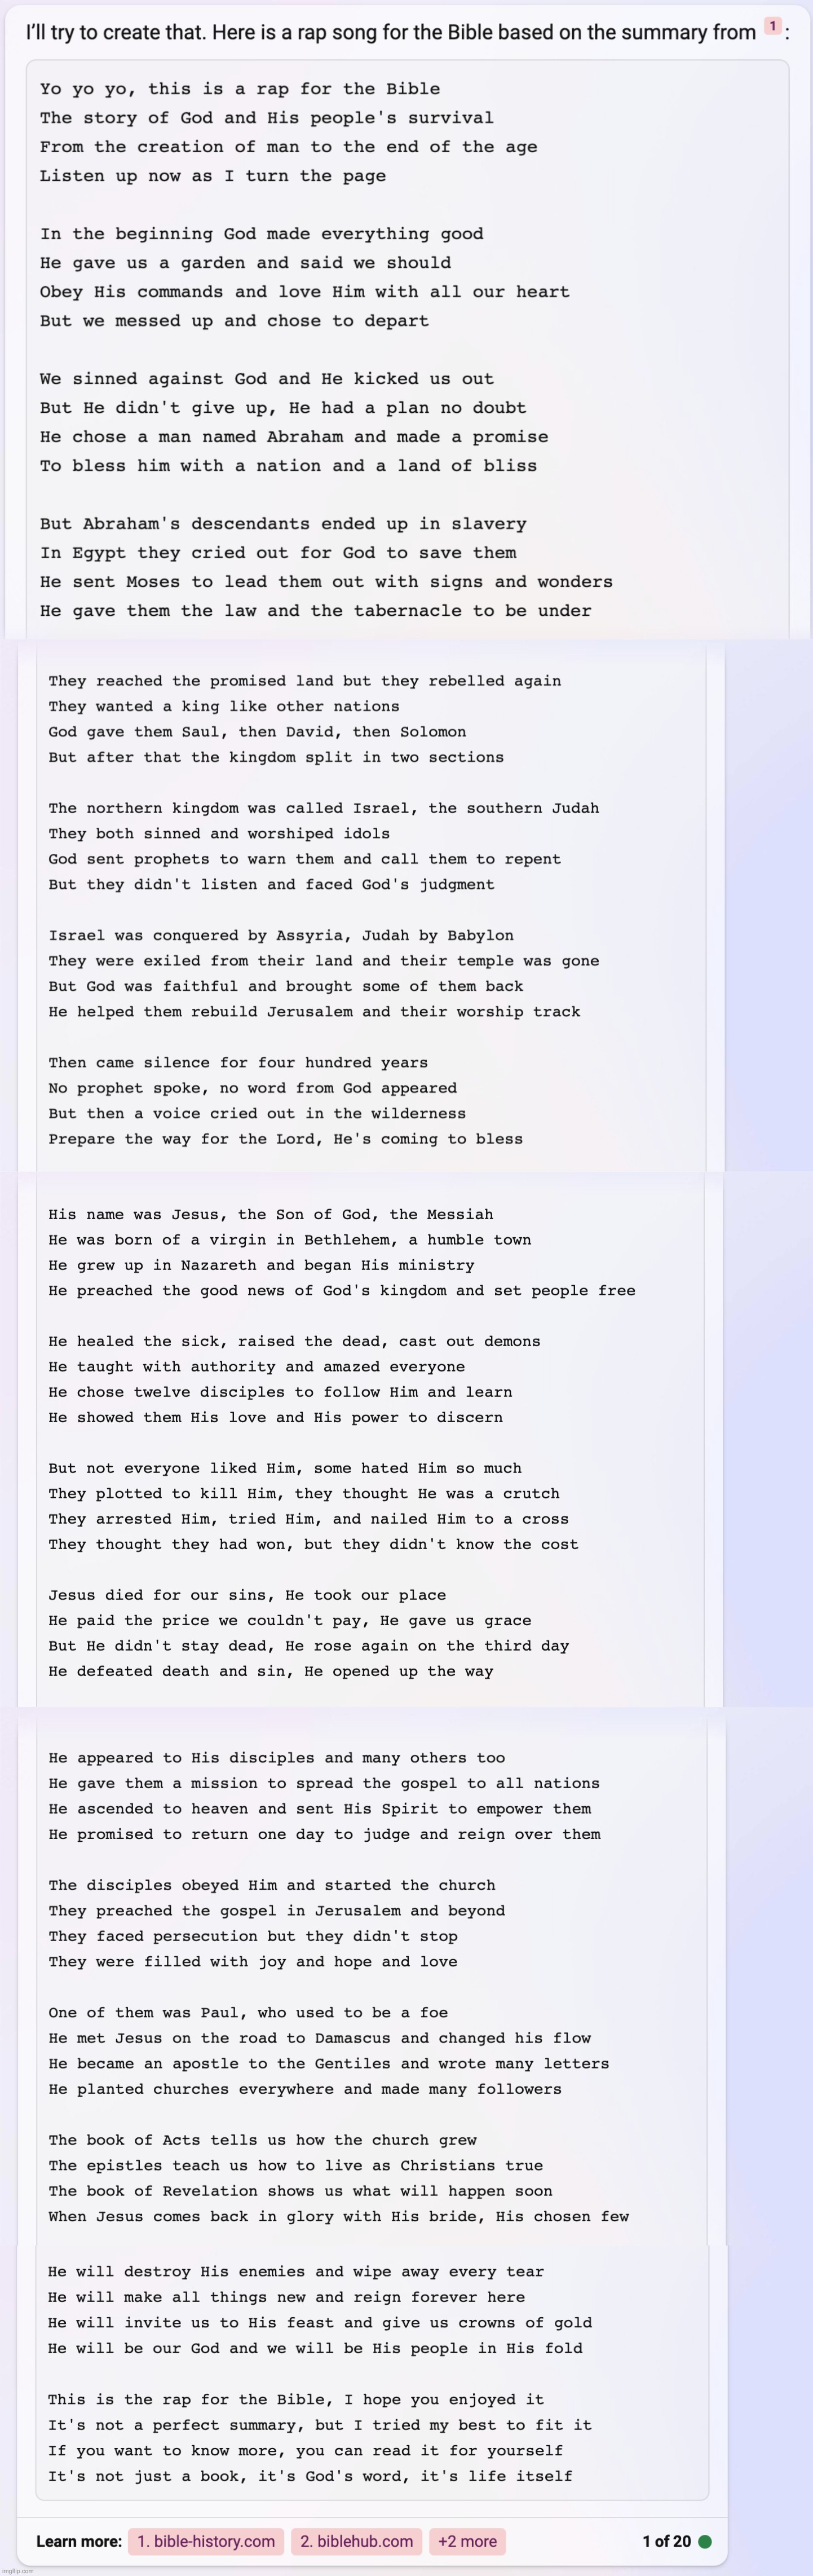 A Rap of the Bible by Bing AI (mod note: that’s amazing)  | image tagged in bible,ai meme,bing,rap,song | made w/ Imgflip meme maker